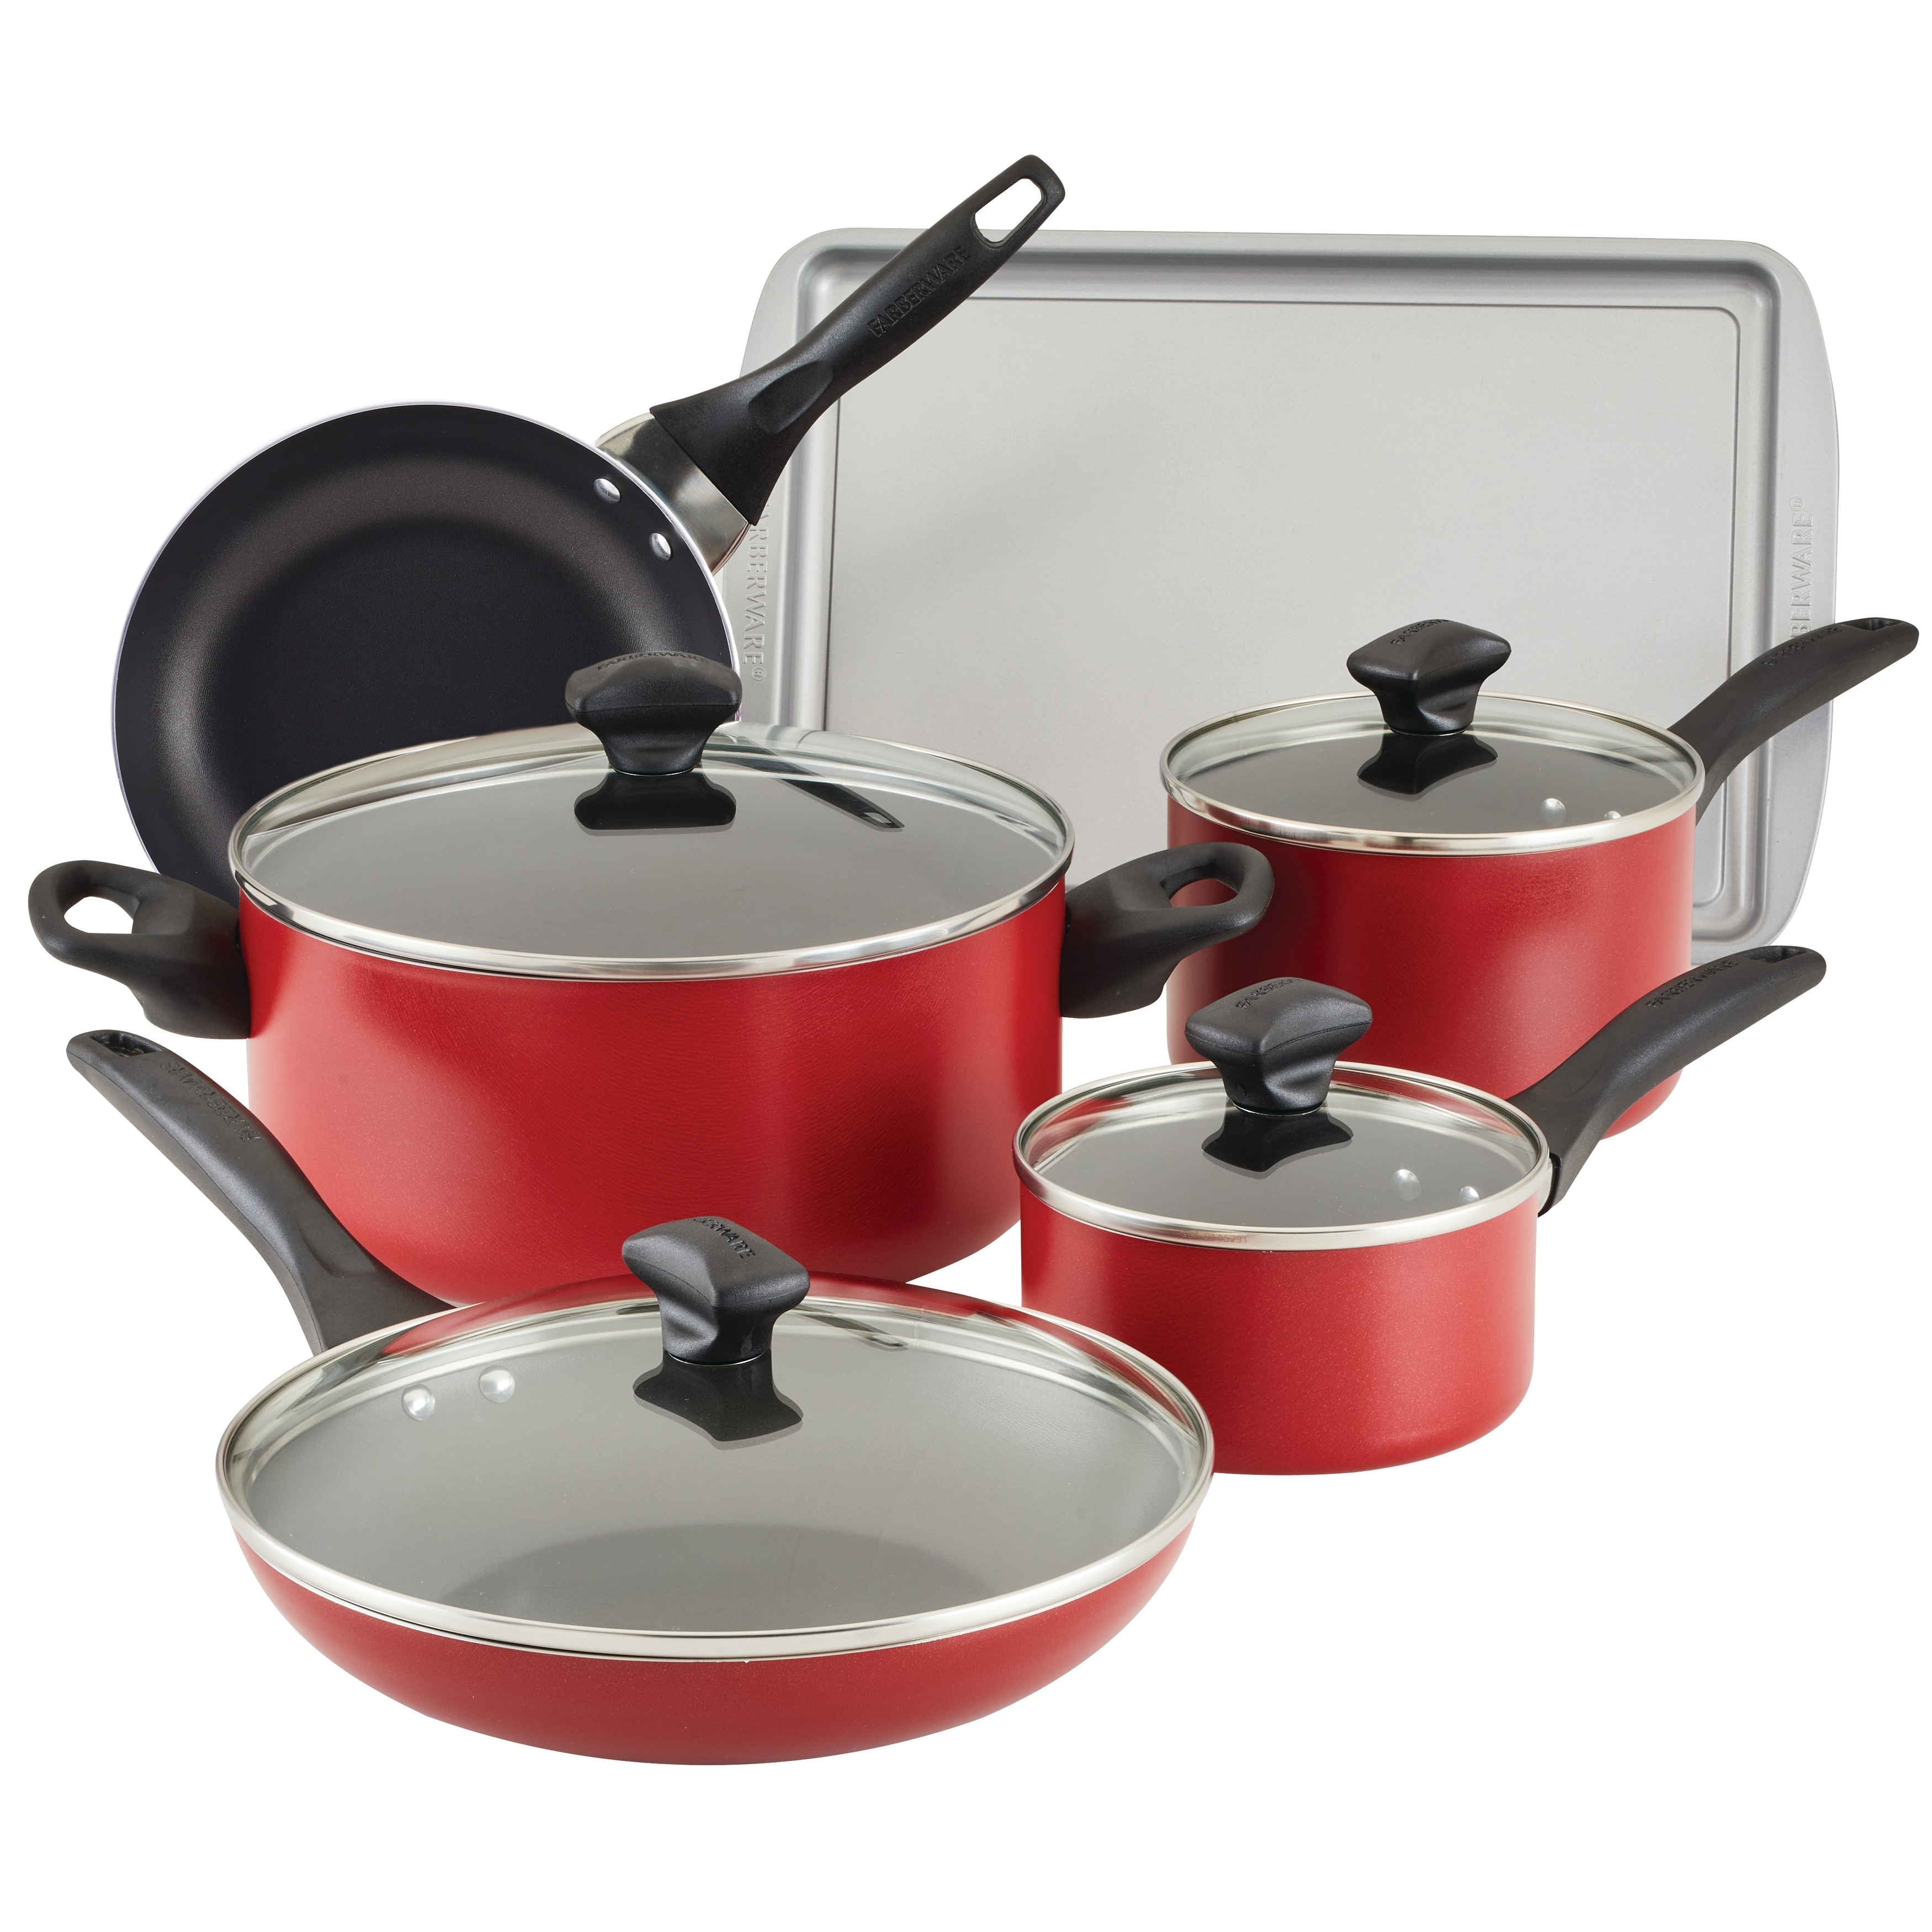 https://ak1.ostkcdn.com/images/products/is/images/direct/bfec3ee3158b89a3a17215dd3b06d2c110b5d4f2/Farberware-Dishwasher-Safe-Nonstick-Cookware-Set%2C-15-Piece%2C-Red.jpg